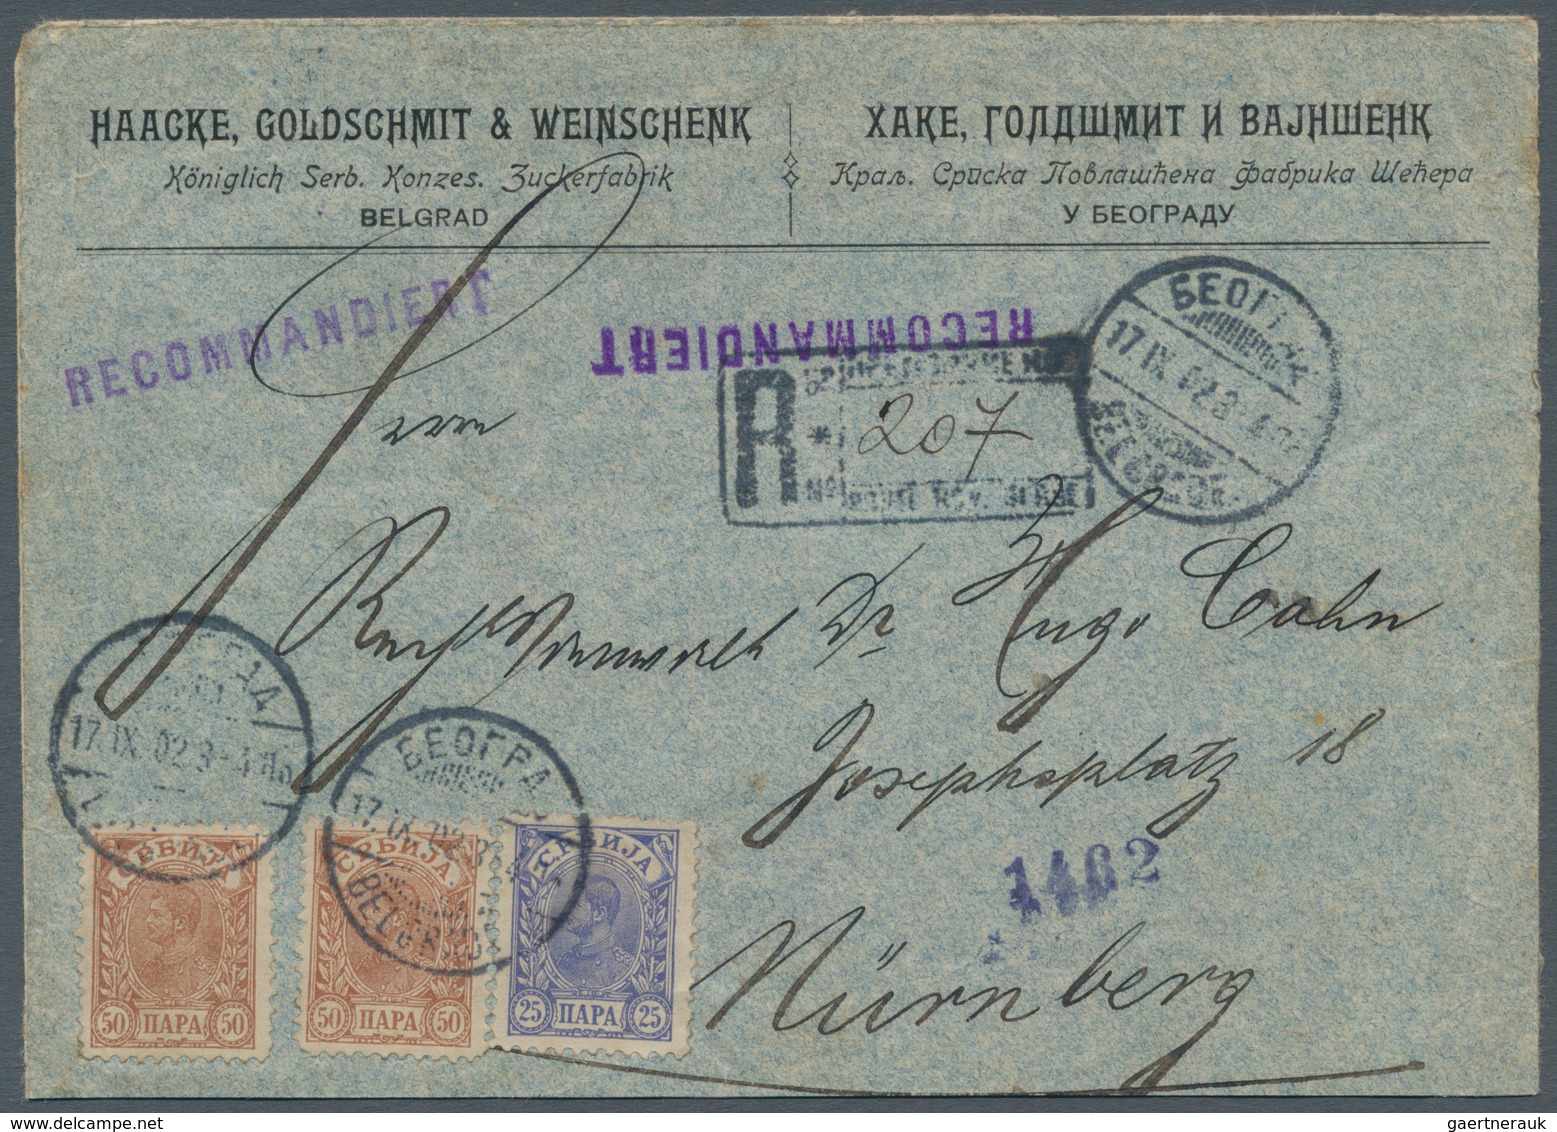 Serbien: 1902, 25pa. Ultramarine And Two Copies 50pa. Brown, Correct 1.25d. Rate On Regsitered Cover - Serbie